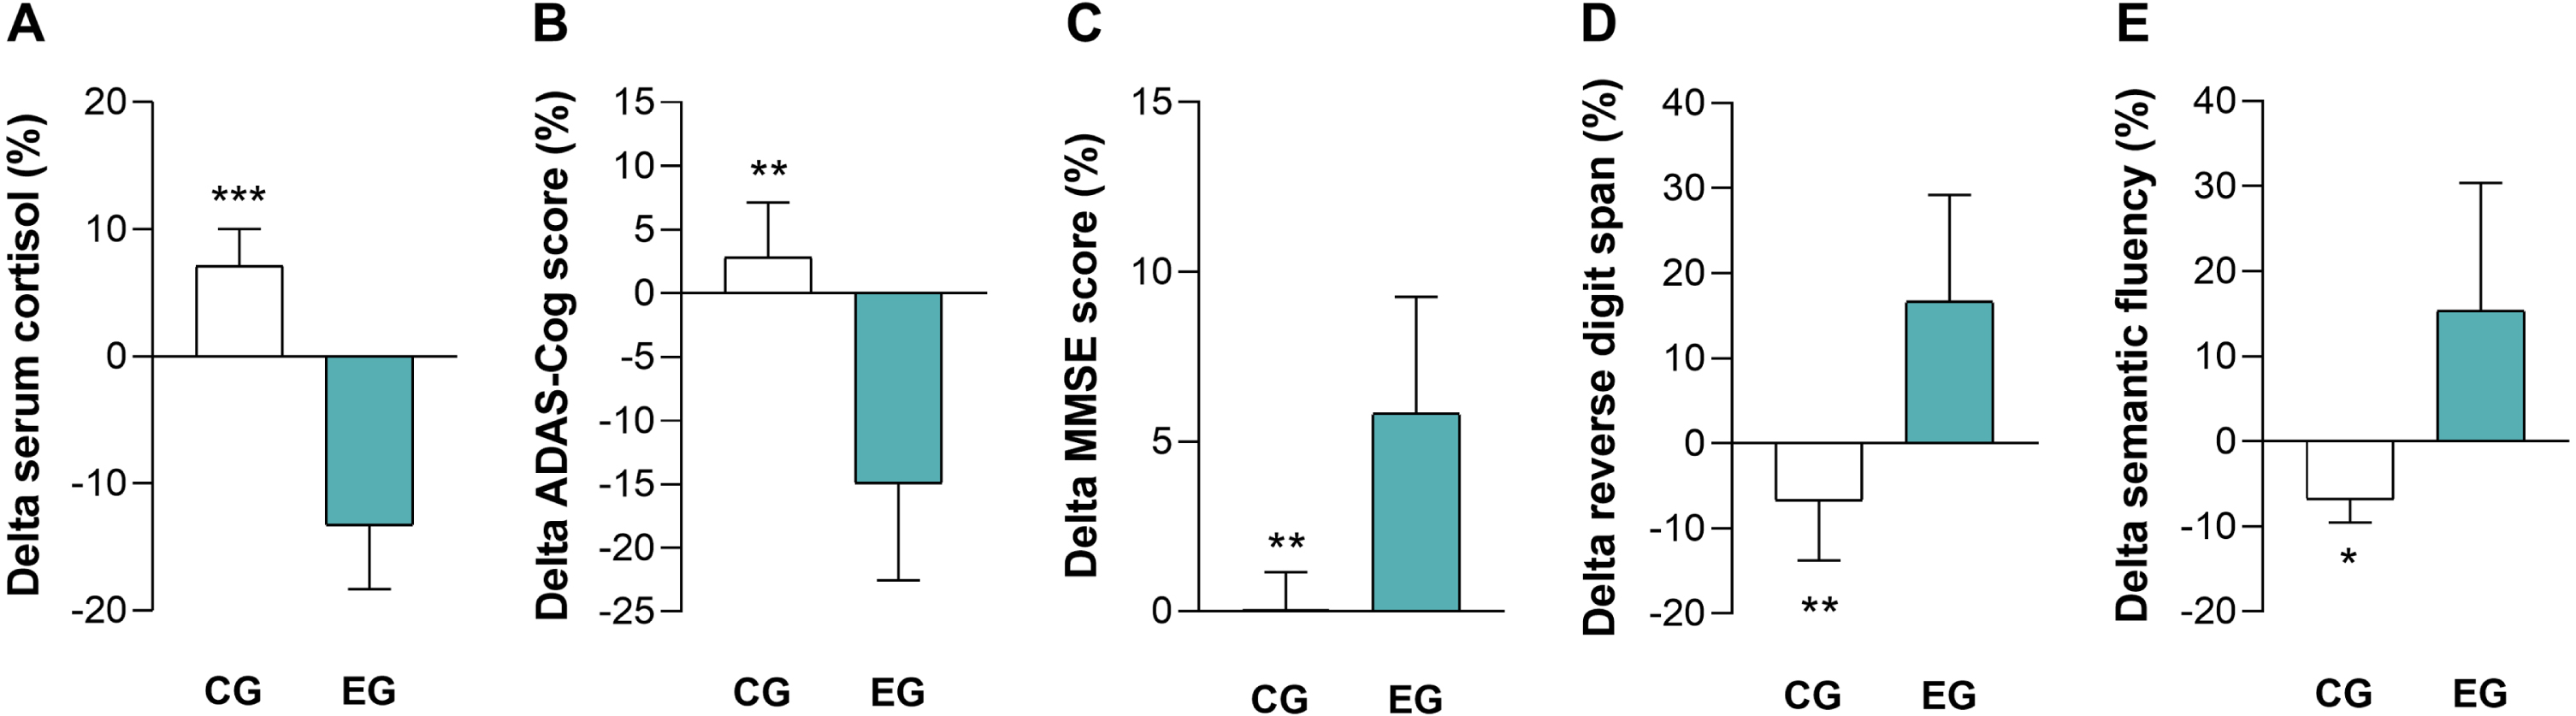 The 2-month comprehensive intervention resulted in a significant reduction in serum cortisol levels and improvement in cognitive performance. EG exhibited a significantly greater reduction in serum cortisol level (A), a significantly greater improvement in general cognitive status (reflected by a reduction in ADAS-Cog (B) and an increase in MMSE (C) scores), and significantly better performance in the reverse digit span (D) and semantic fluency (E) tests compared to the CG. CG, control group; EG, experimental group; ADAS-Cog, Alzheimer’s Disease Assessment Scale-Cognitive; MMSE, Mini-Mental State Examination (MMSE). *p < 0.05, **p < 0.01, ***p < 0.001.